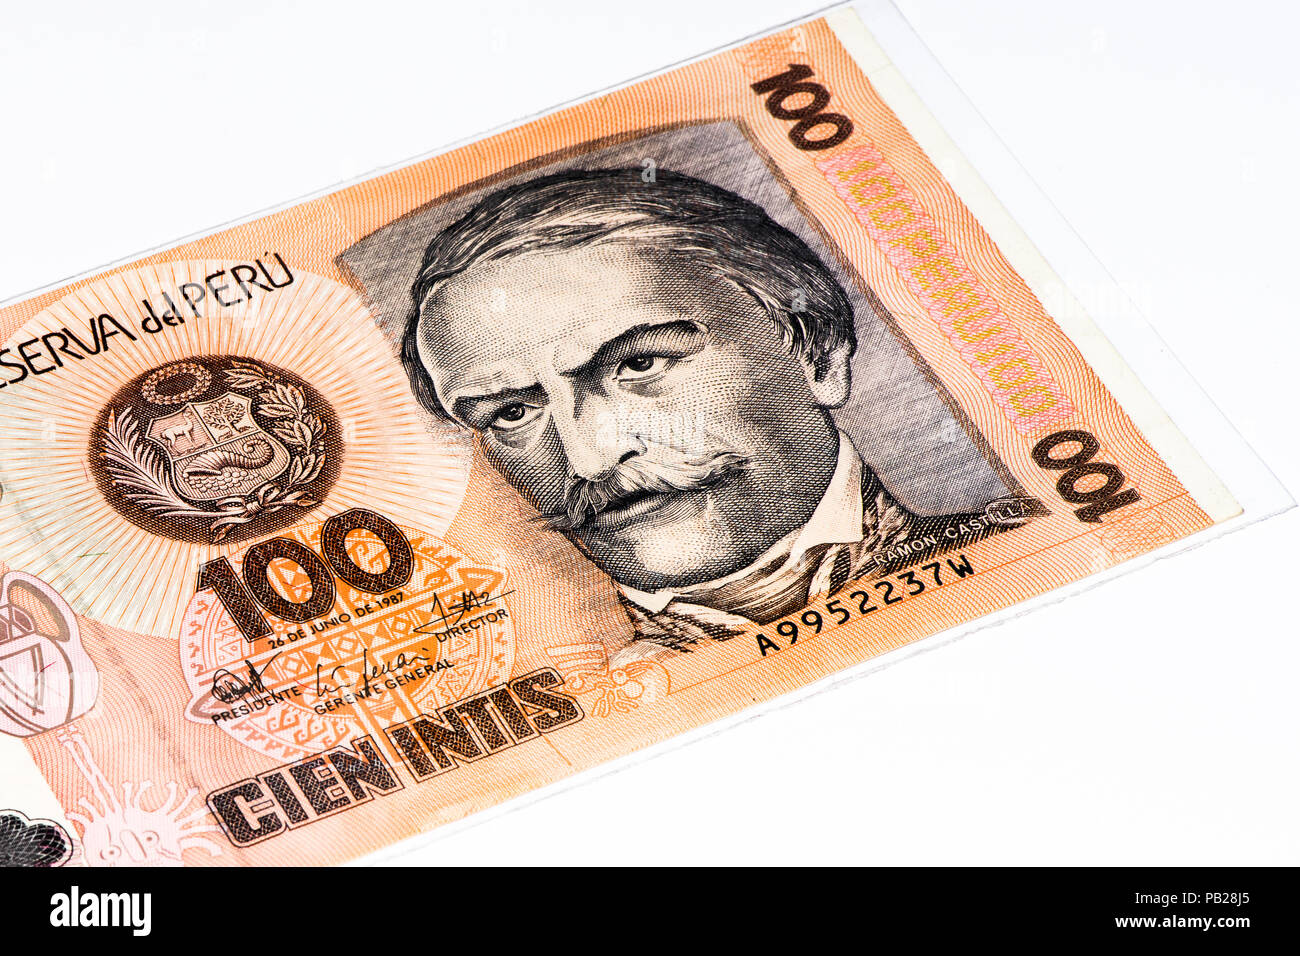 100 intis bank note. Inti is the former currency of Peru Stock Photo - Alamy